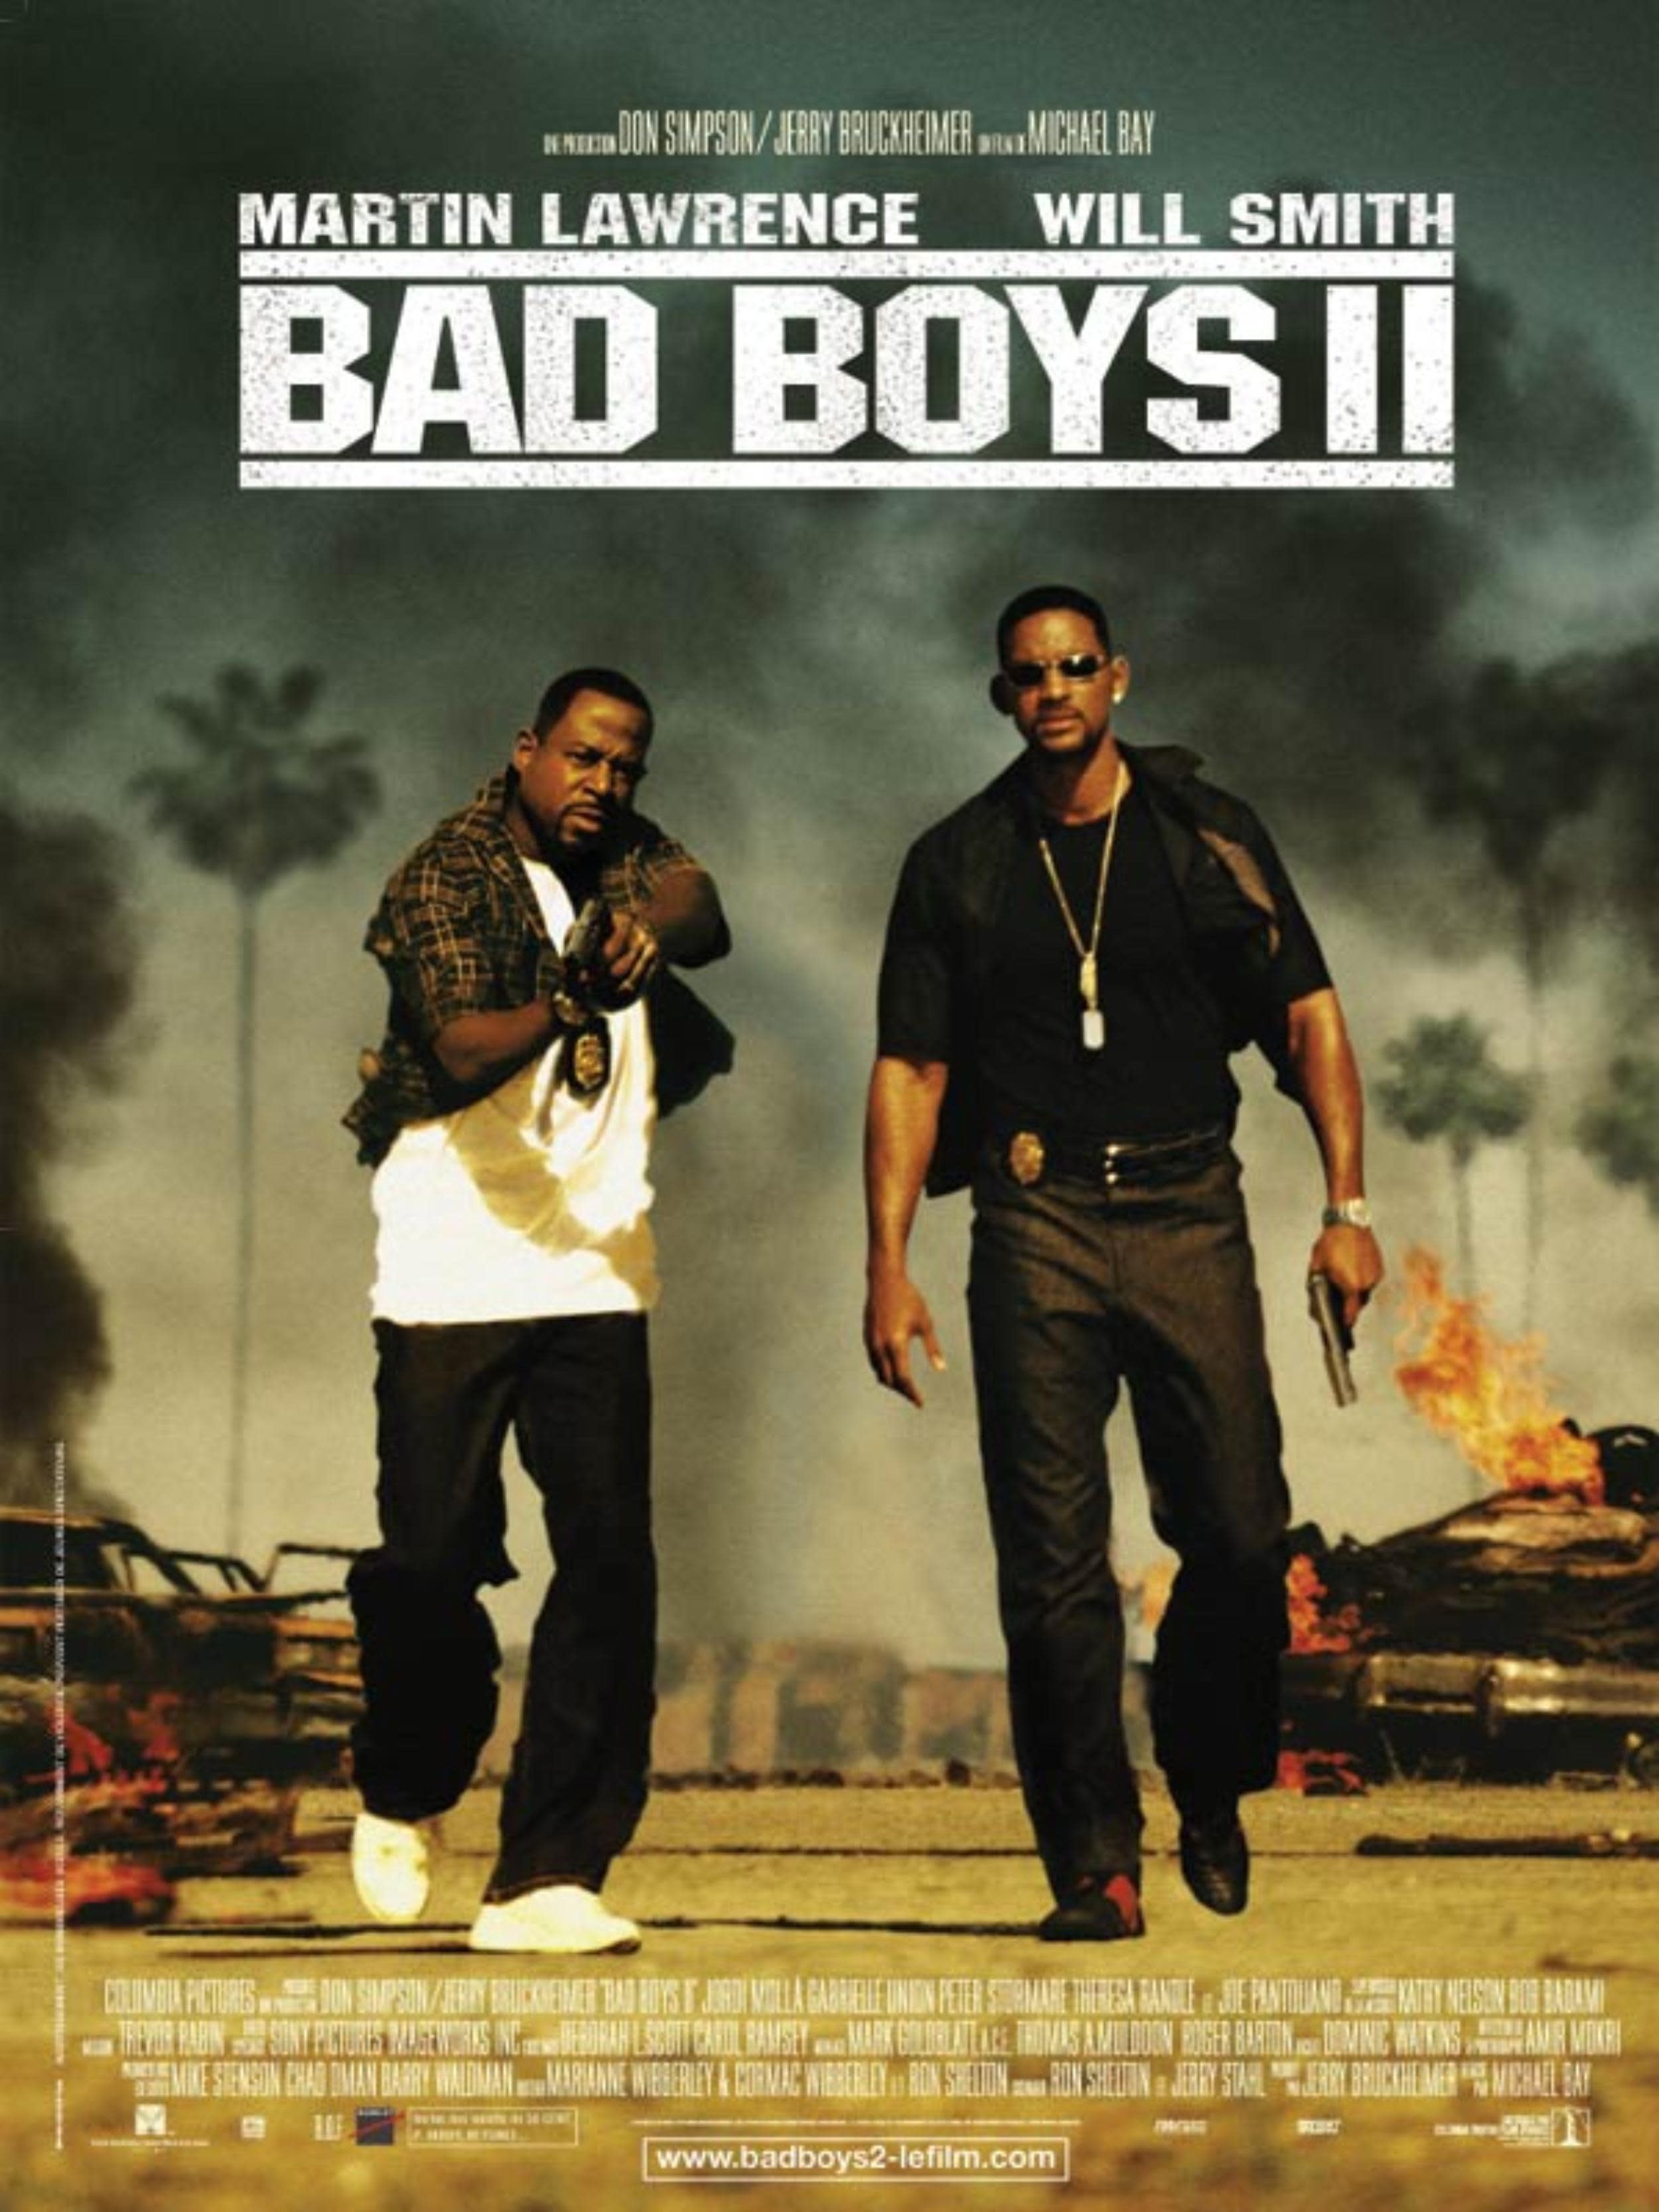 'Bad Boys 3' gets official title but delayed release date